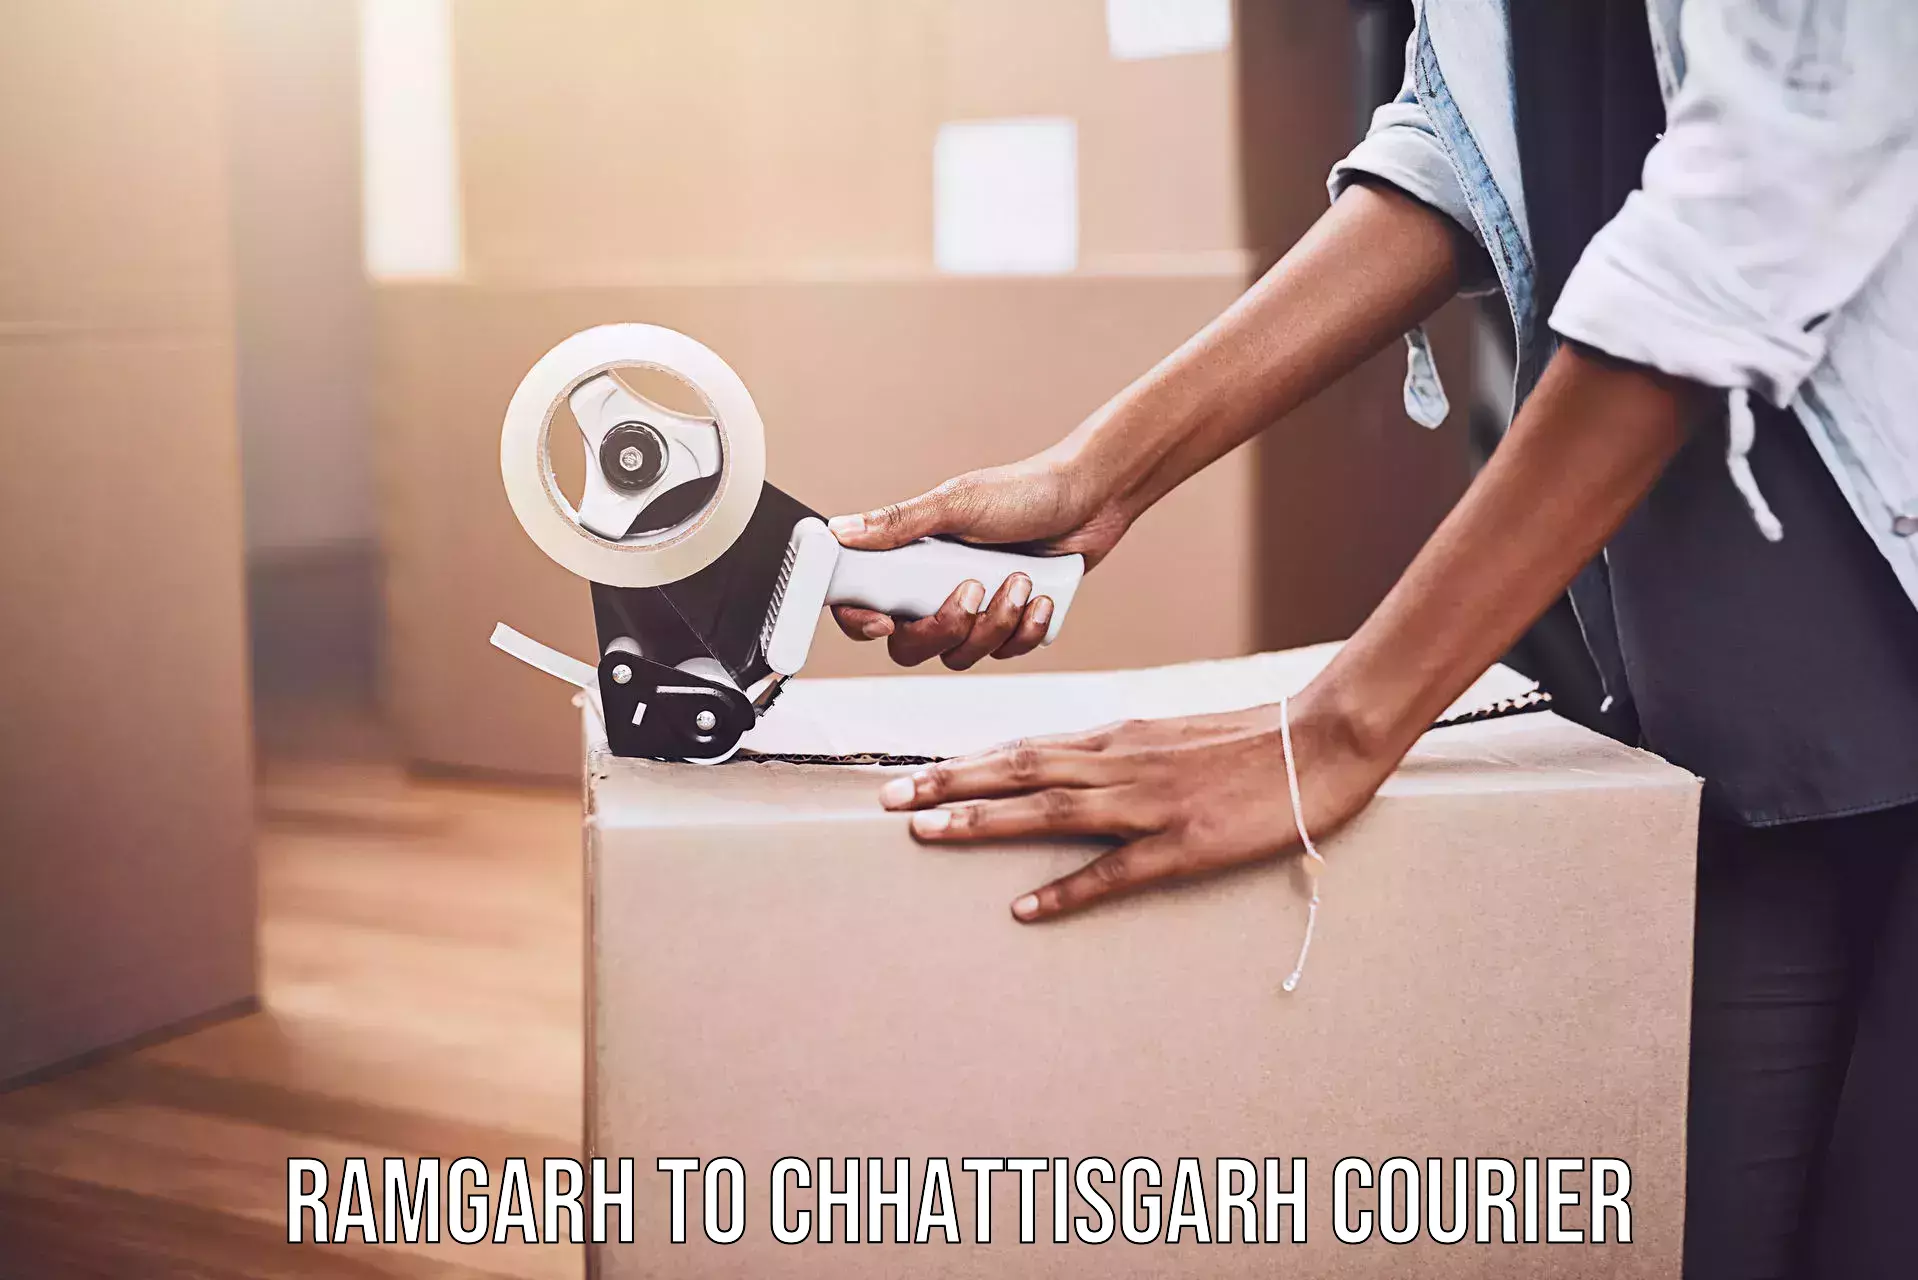 Customer-oriented courier services Ramgarh to Patna Chhattisgarh